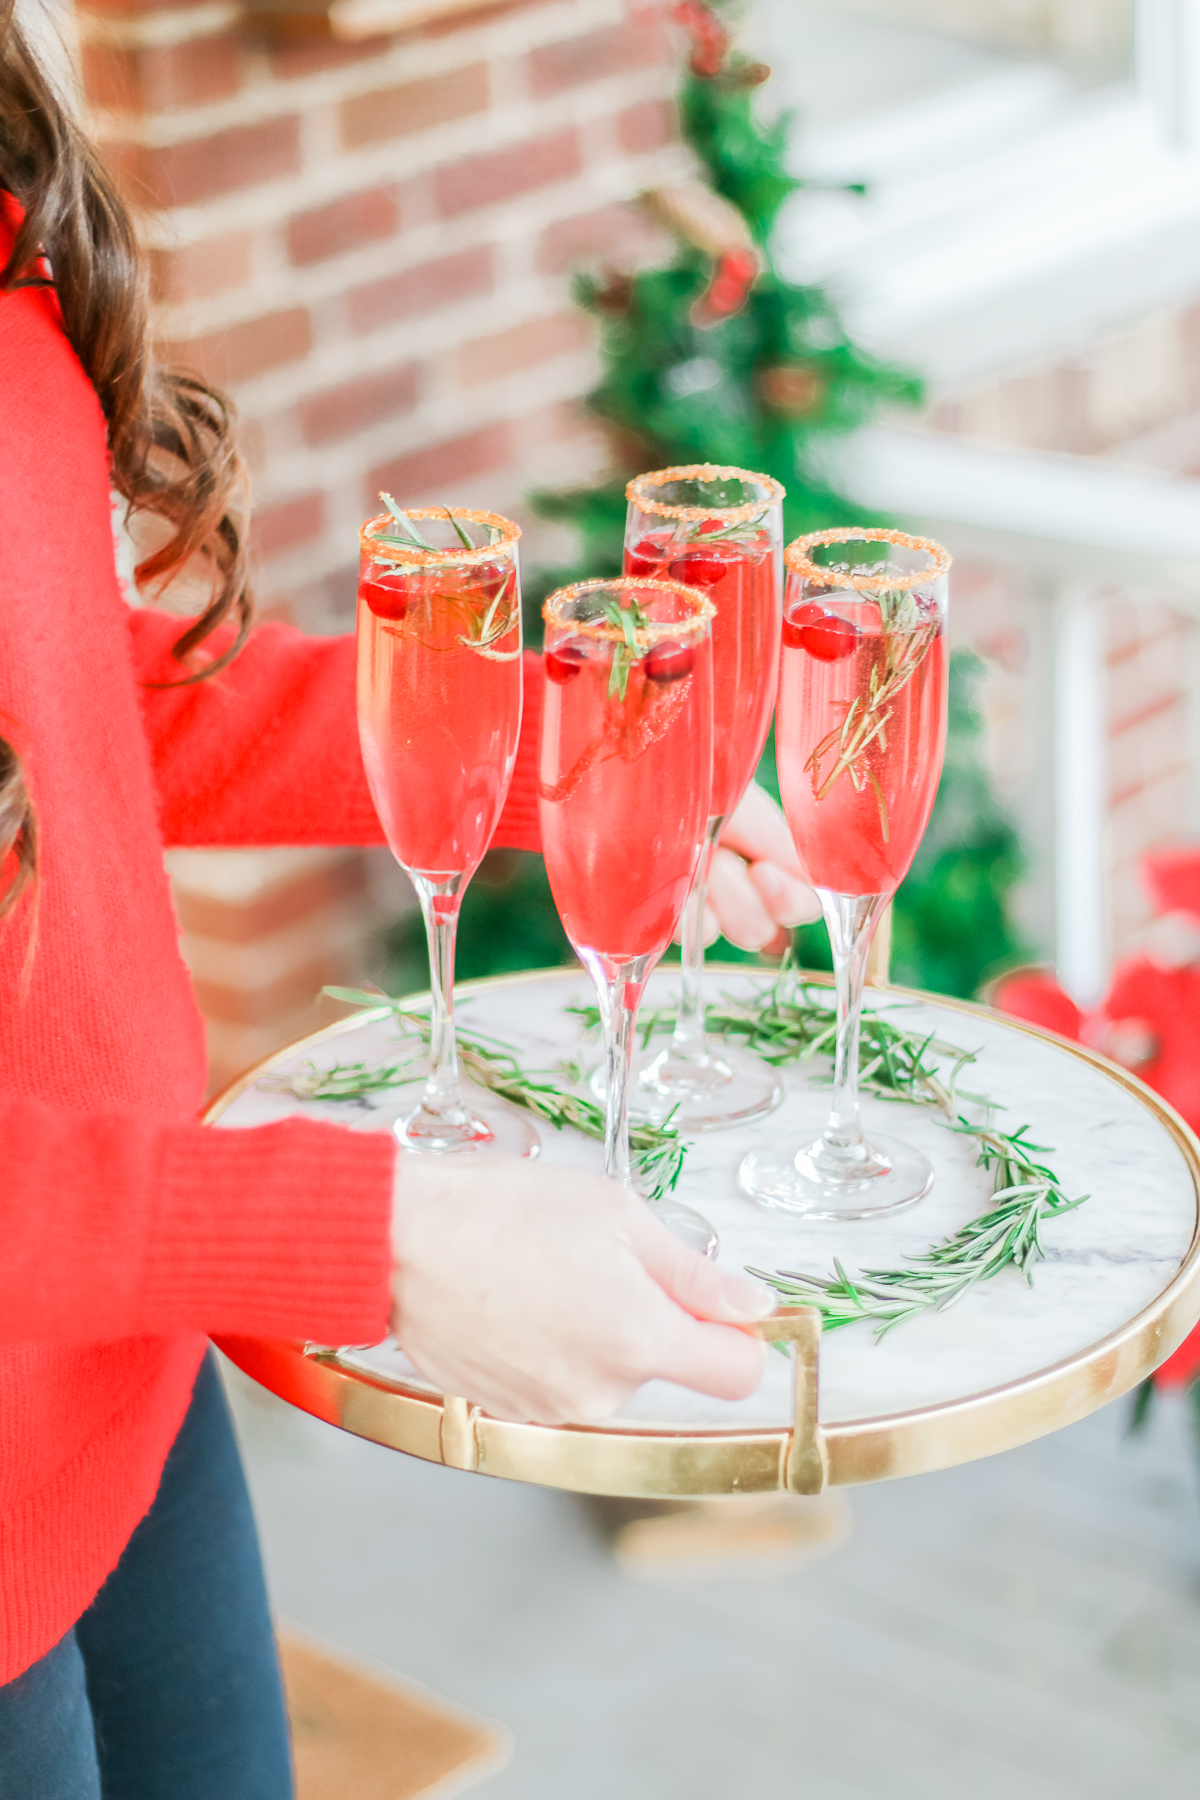 Ombré Cranberry Sparkler: A Cranberry Gin Cocktail for the Holidays by southern lifestyle blogger Stephanie Ziajka from Diary of a Debutante, Lunetta Prosecco review, fresh cranberry cocktail, red ombre cocktail